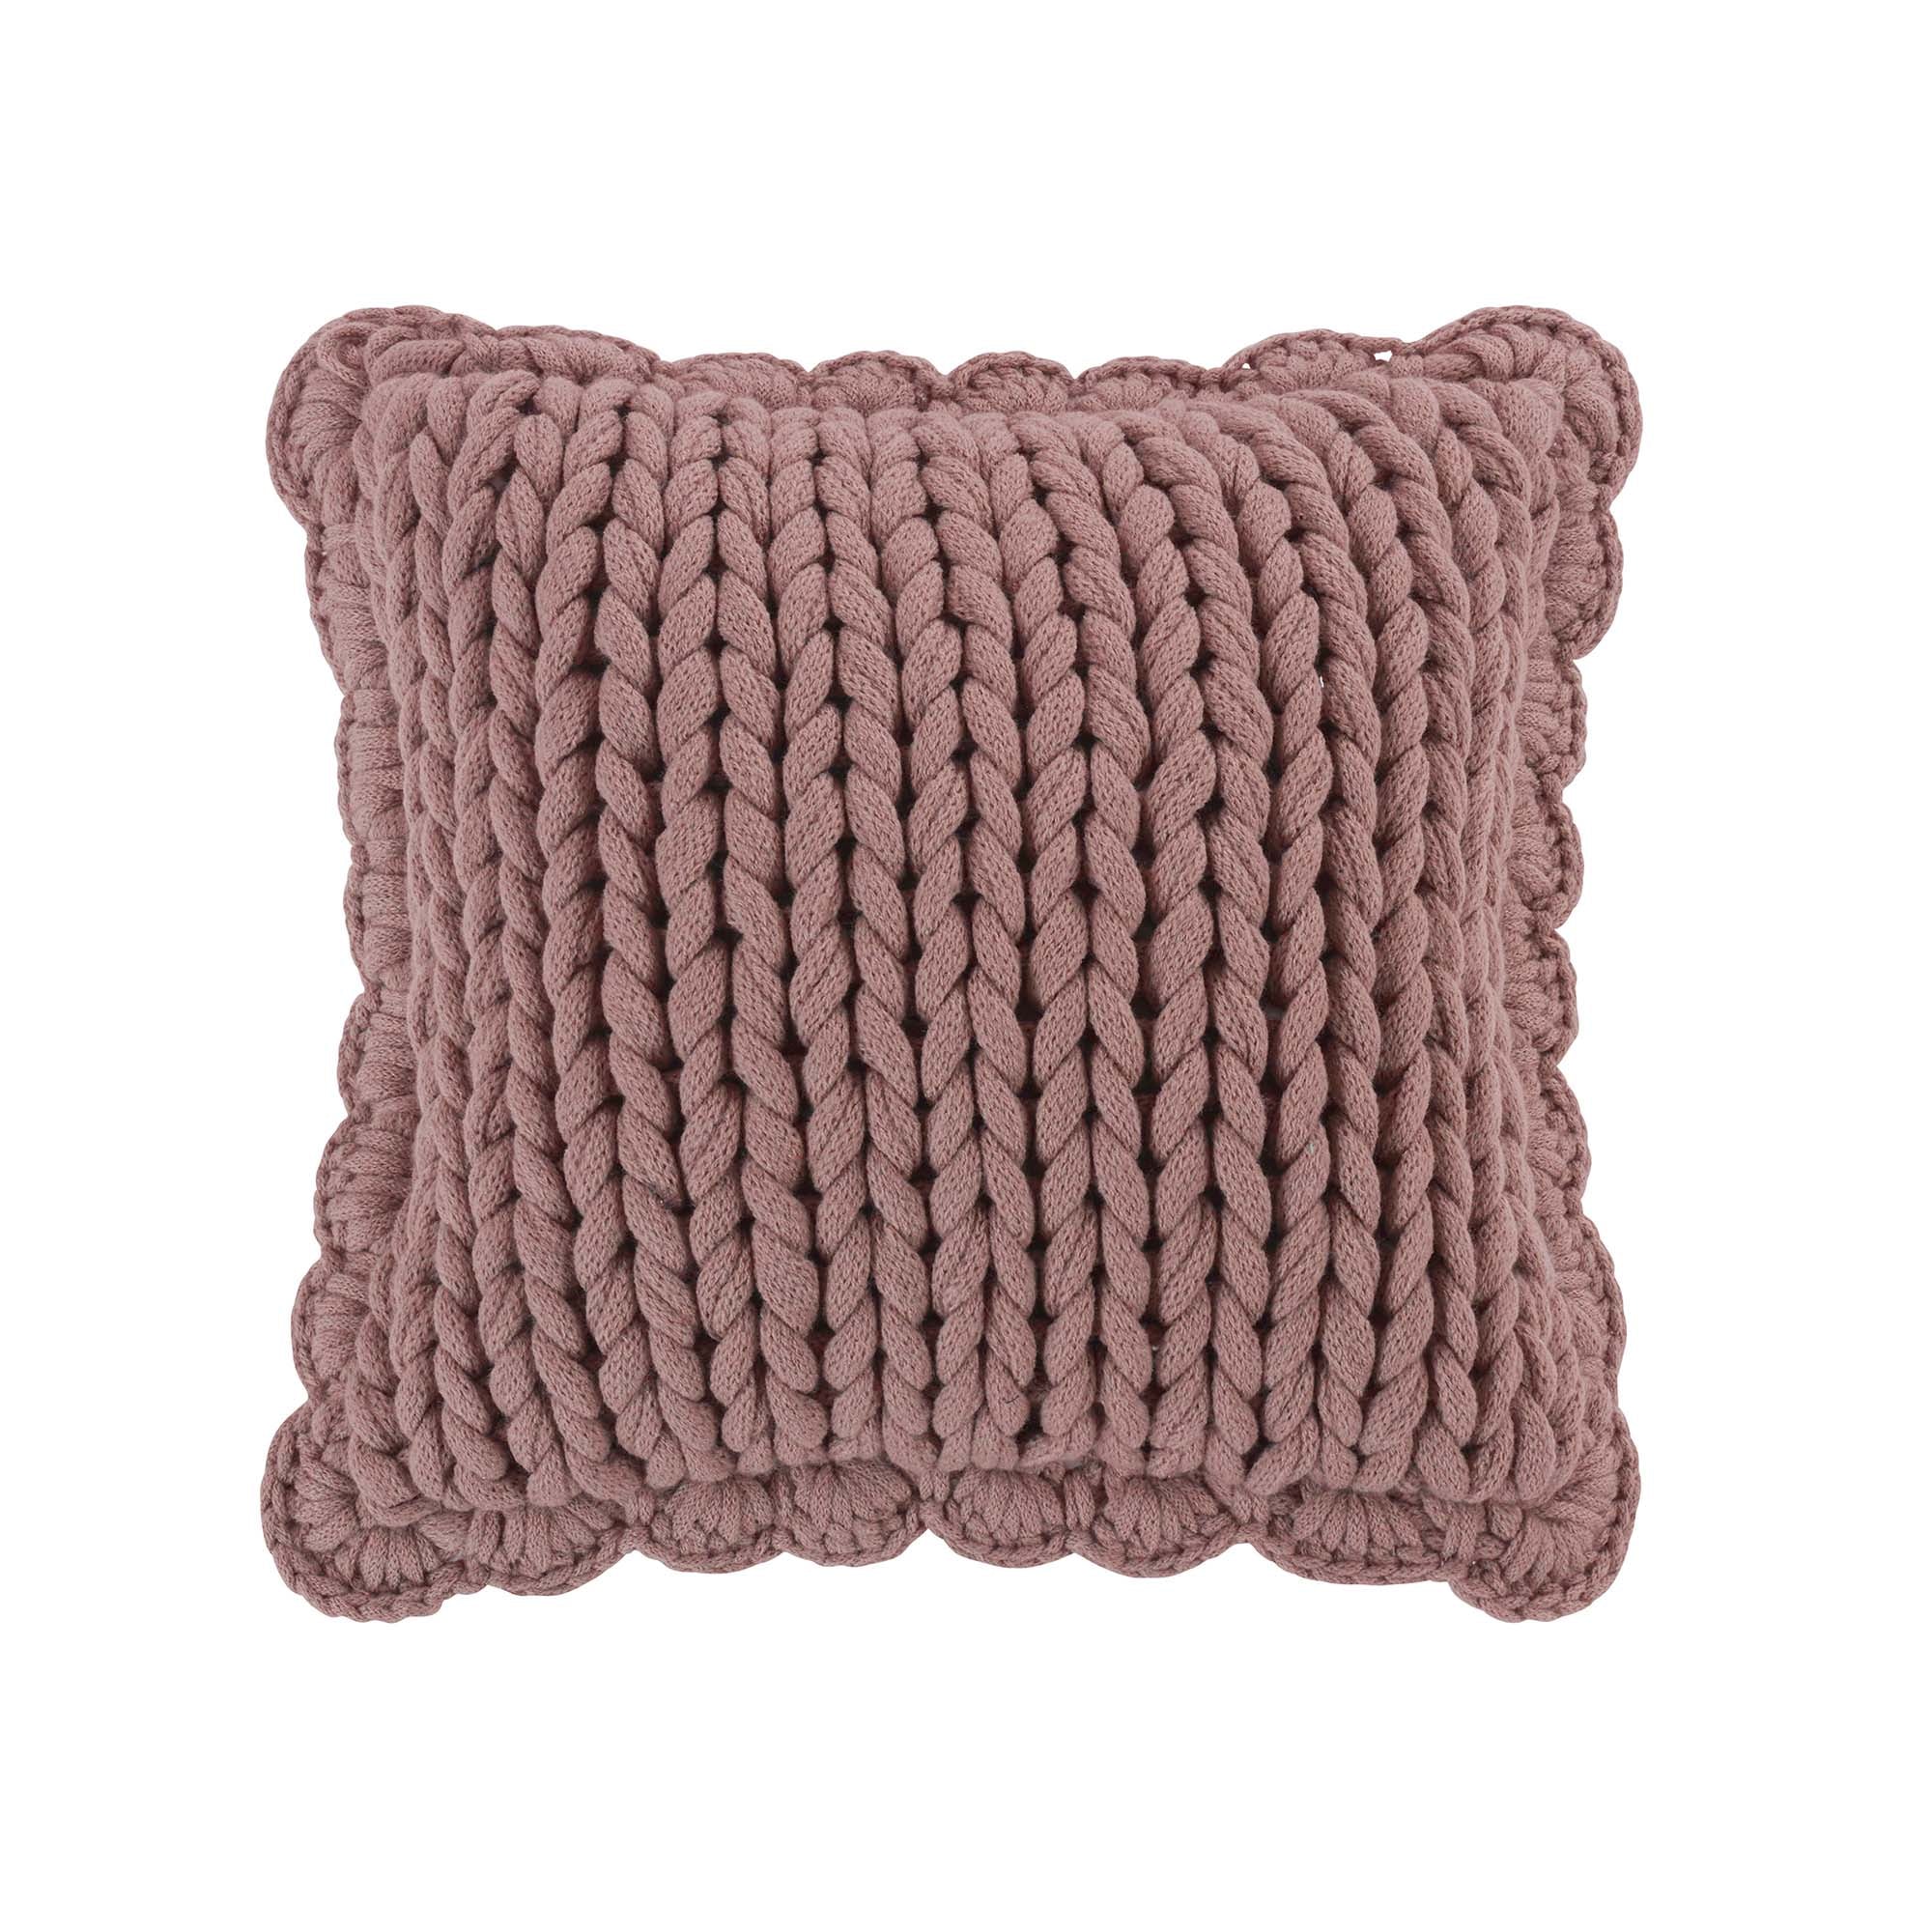 Chunky Knitted Mauve Decorative Pillow Throw Pillows By Donna Sharp